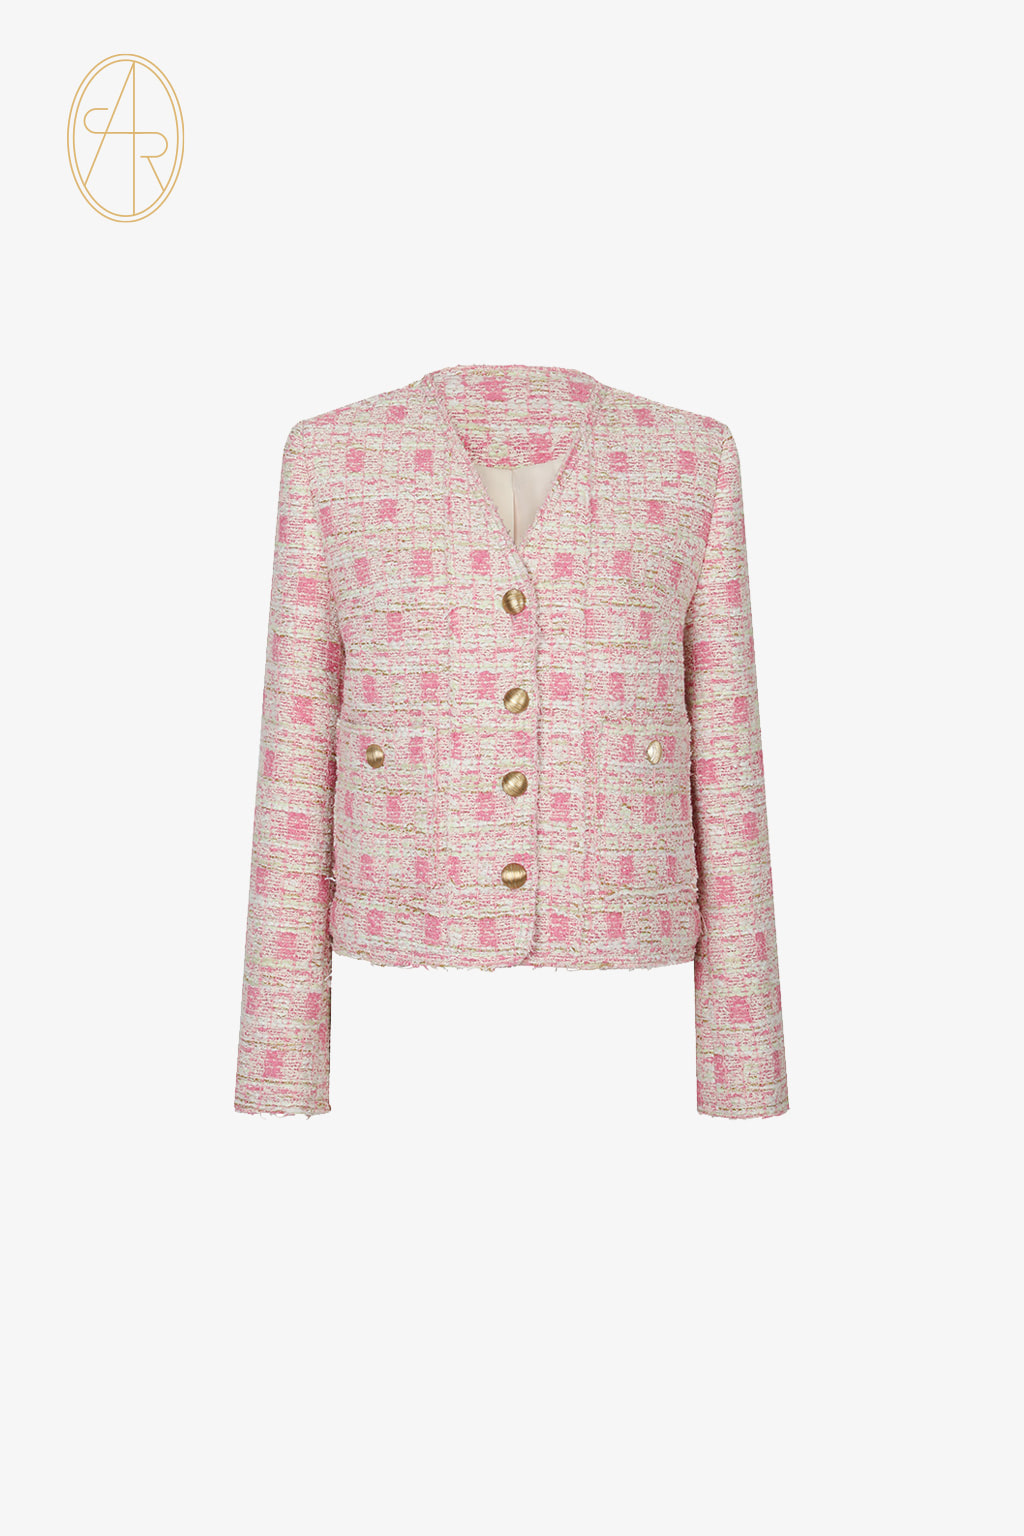 [exclusive] peony tweed jacket (fabric from Italy) - pre order